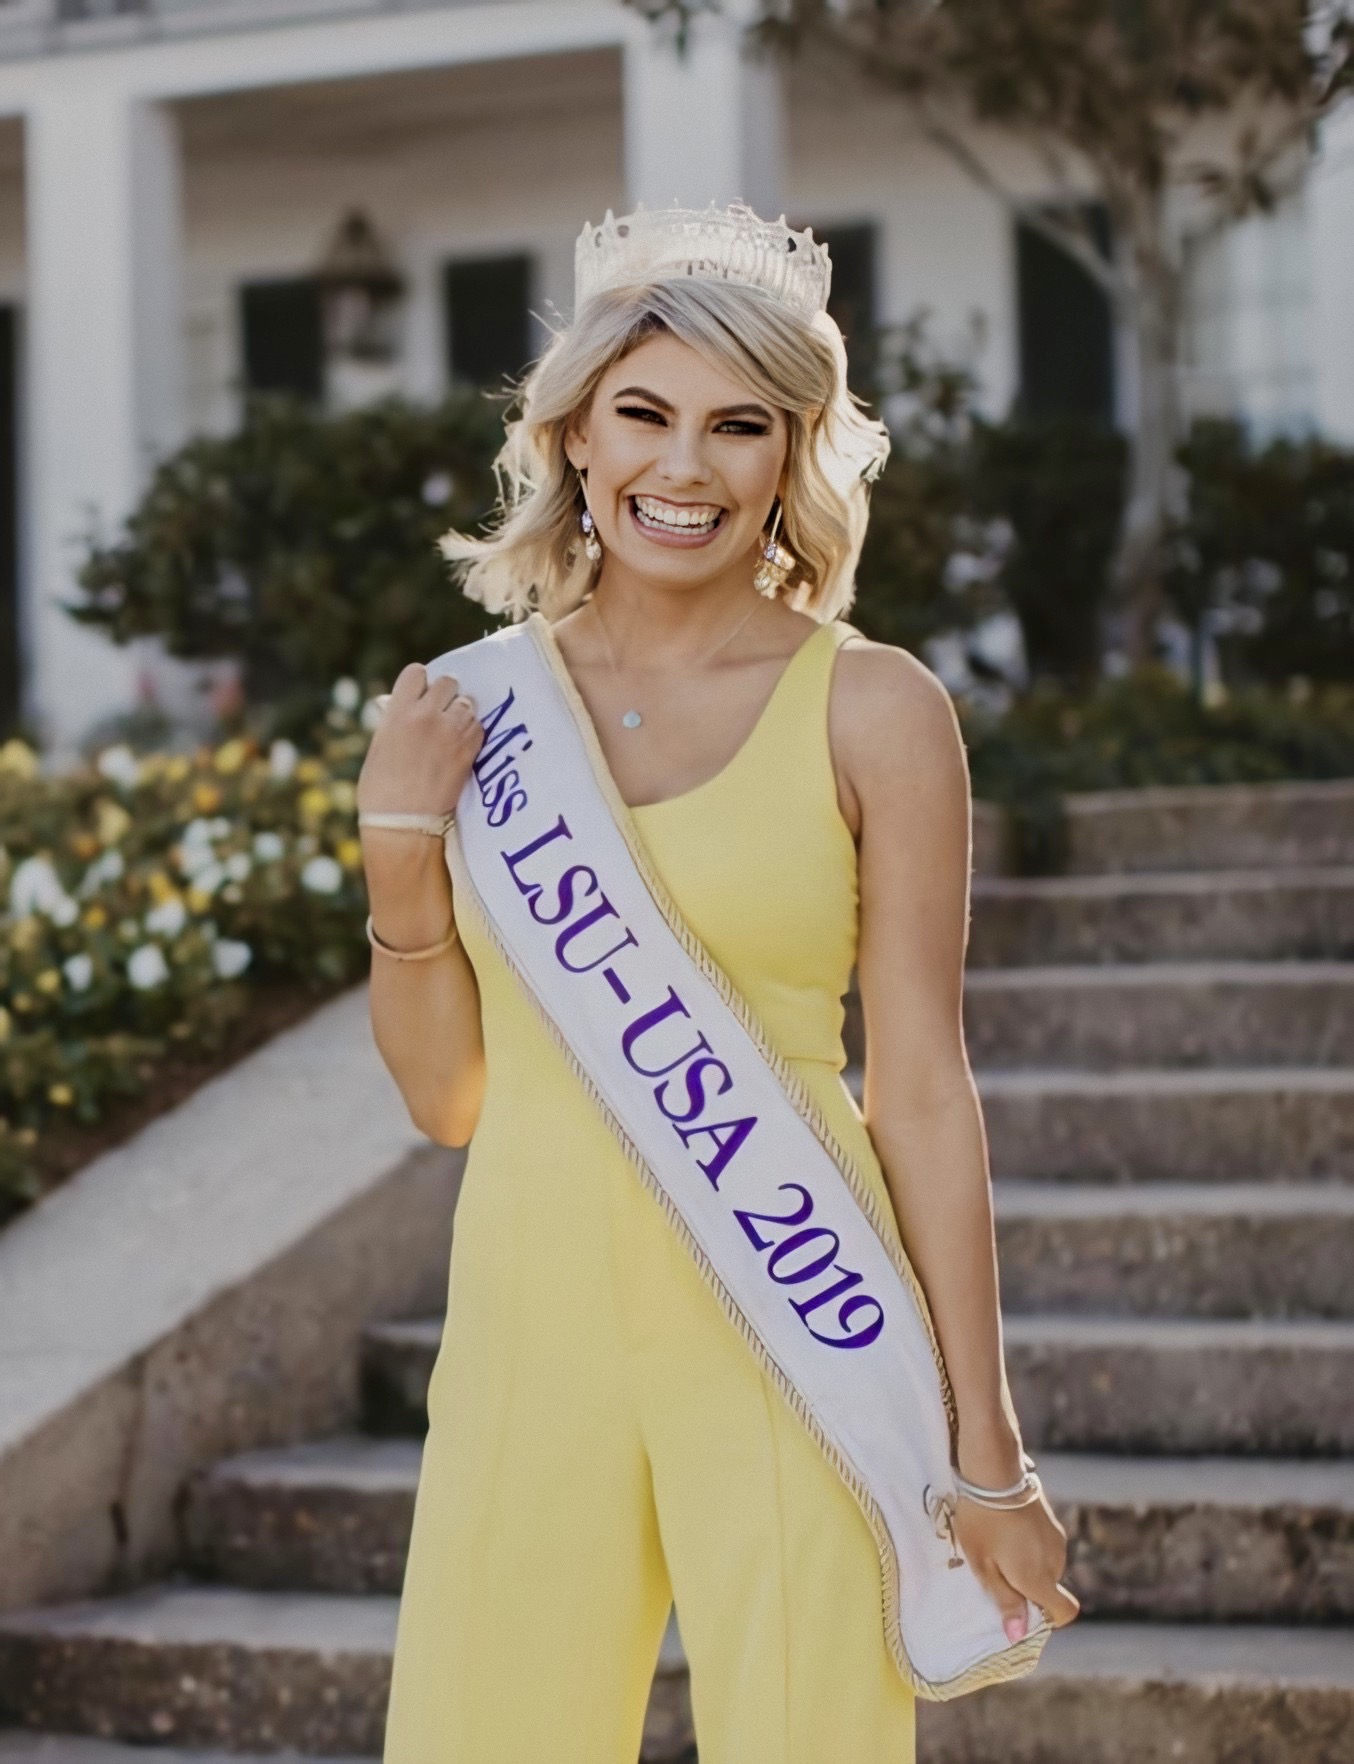 Keighley Kelley stands outside of her sorority house dressed in her crown and Miss LSU-USA 2019 sash.